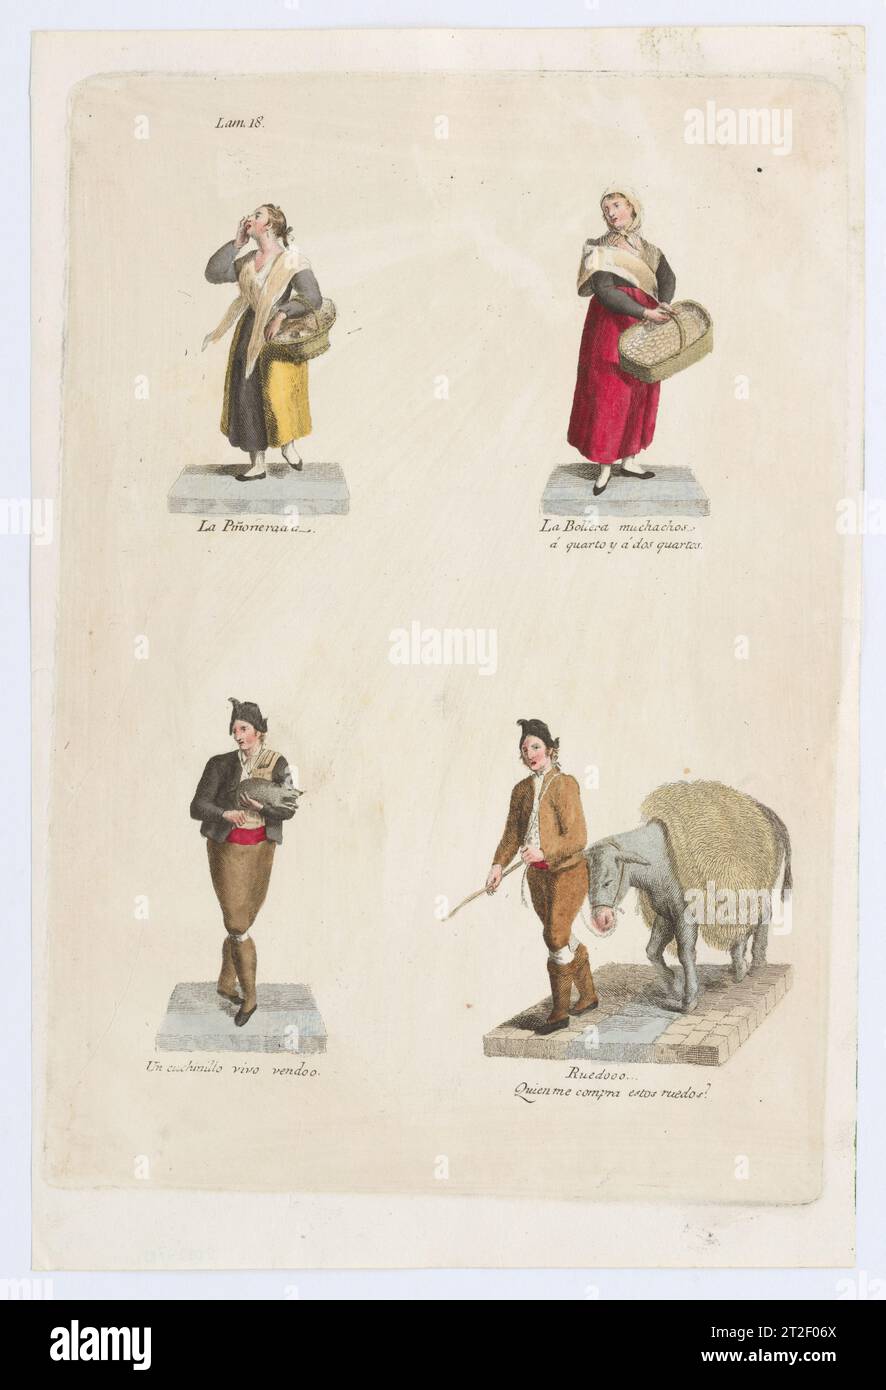 Plate 18: four street vendors from Madrid selling food, a pig etc, from 'Los Gritos de Madrid' (The Cries of Madrid) Miguel Gamborino Spanish Publisher Imprenta Real, Madrid Spanish 1809–17 See comment for 2022.53. View more. Plate 18: four street vendors from Madrid selling food, a pig etc, from 'Los Gritos de Madrid' (The Cries of Madrid). Miguel Gamborino (Spanish, Valencia 1760–1828 Madrid). 1809–17. Engraving with hand coloring. Imprenta Real, Madrid. Prints Stock Photo